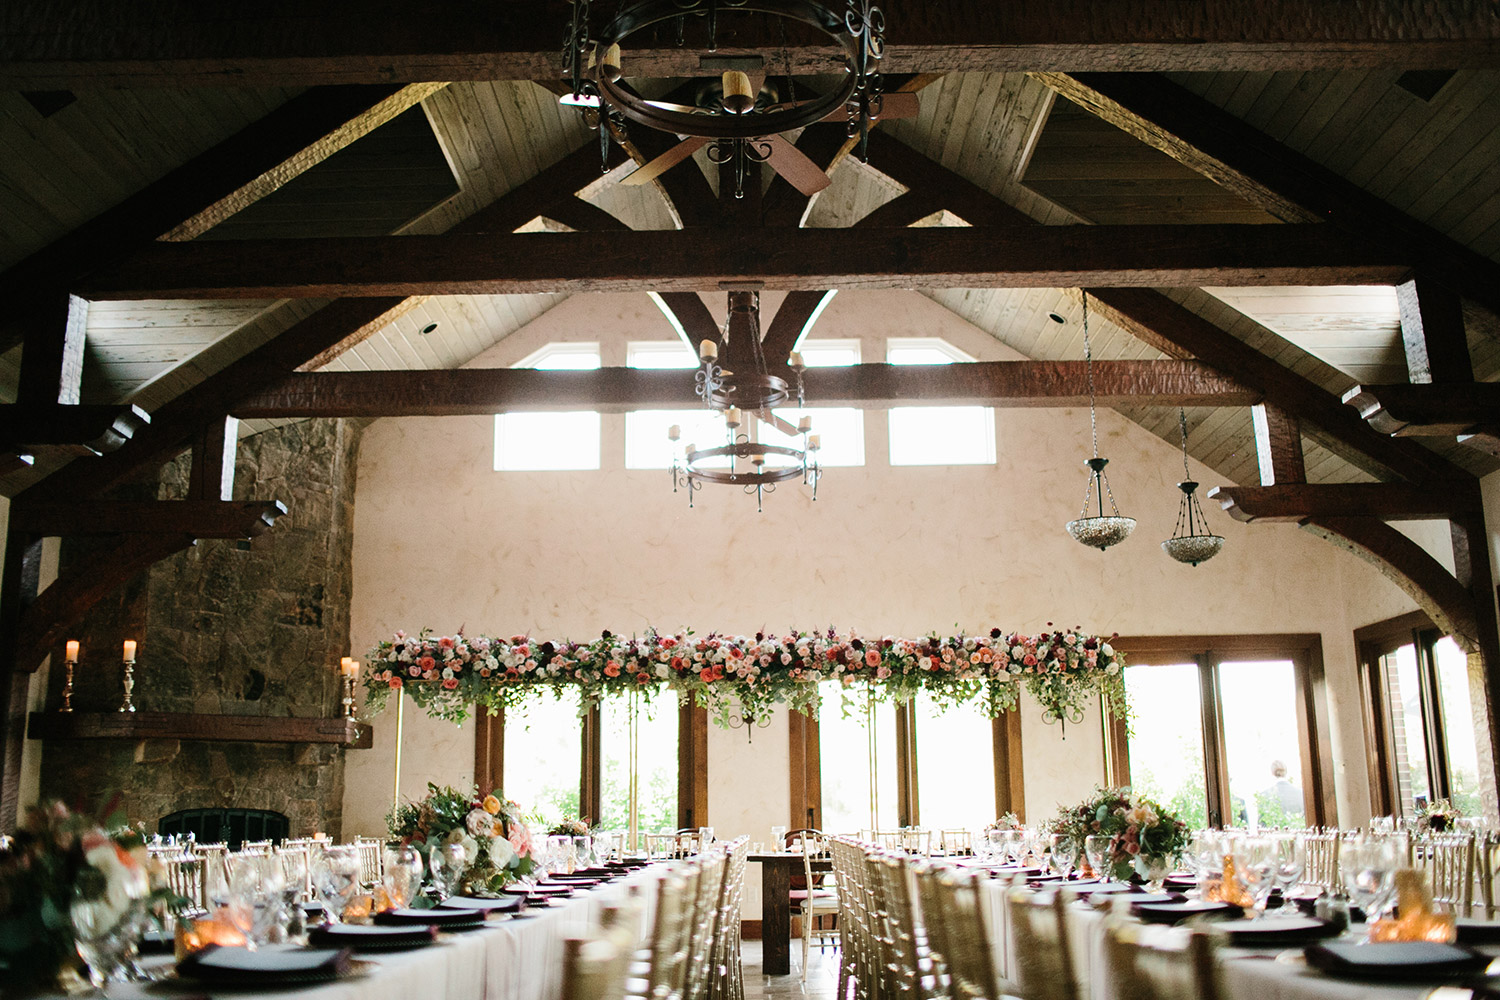 Wedding reception with large wood beams and tall floral hanging centerpiece